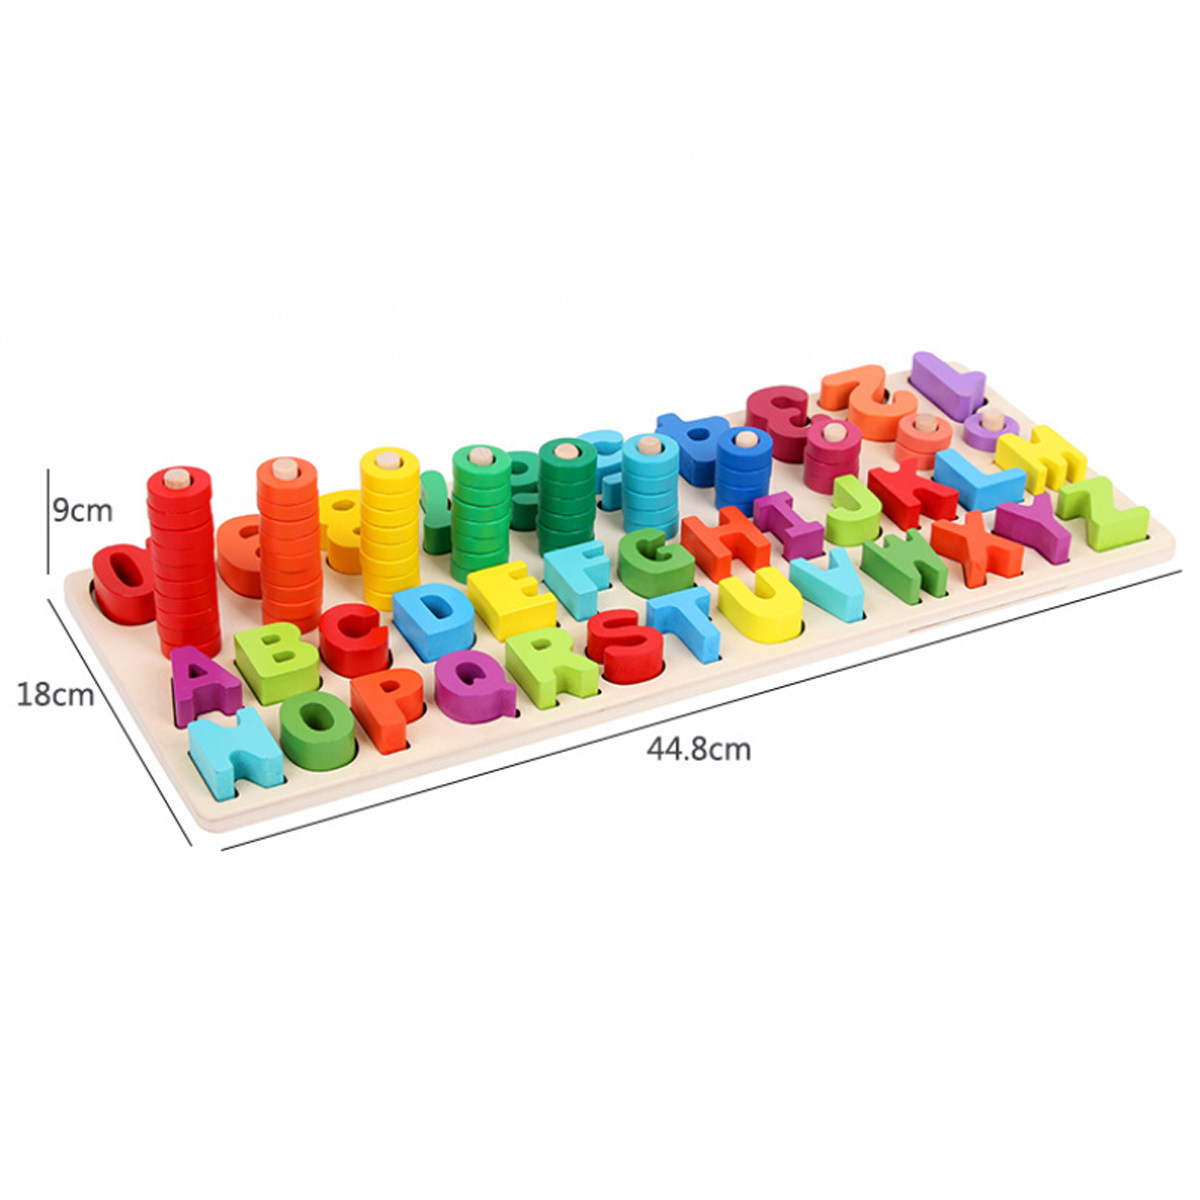 Wooden-Math-Toy-Board-Montessori-Counting-Board-Preschool-Learning-Toys-for-Children-Gifts-1629382-10